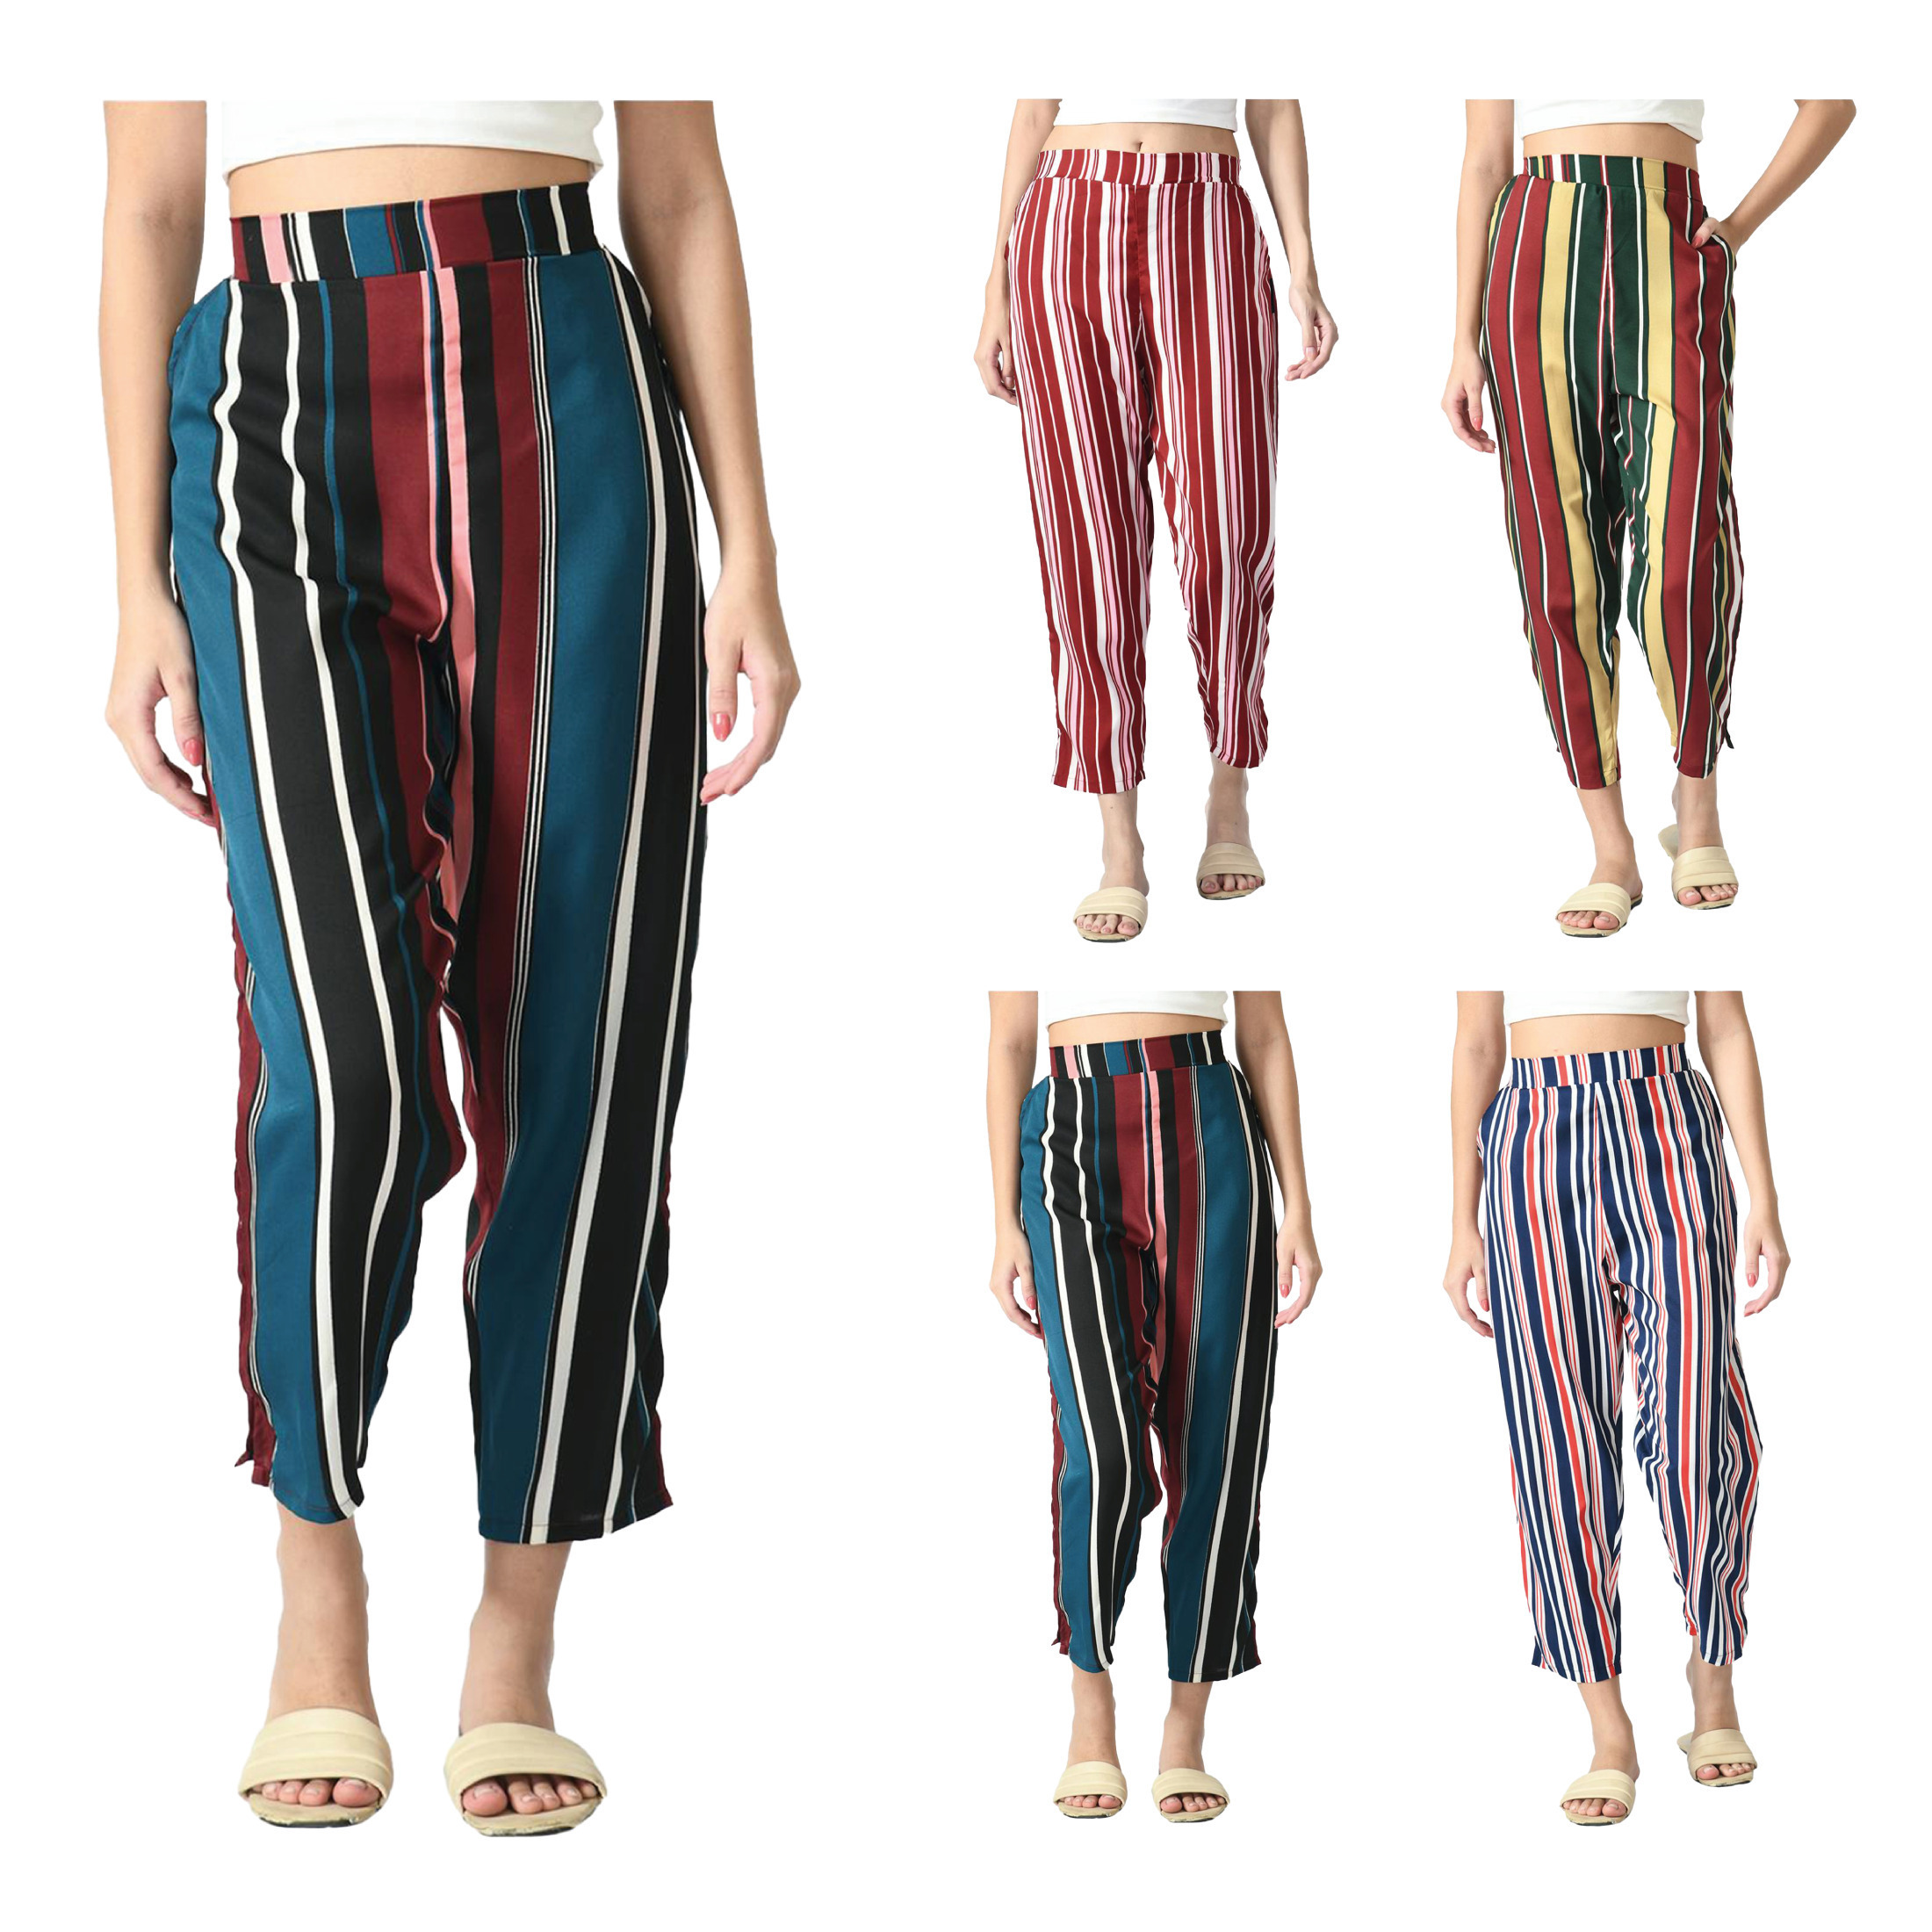 3-Pack Women's Cotton Palazzo Pants Striped Print Soft & Comfortable Western Style Regular Fit Ladies Trouser - S